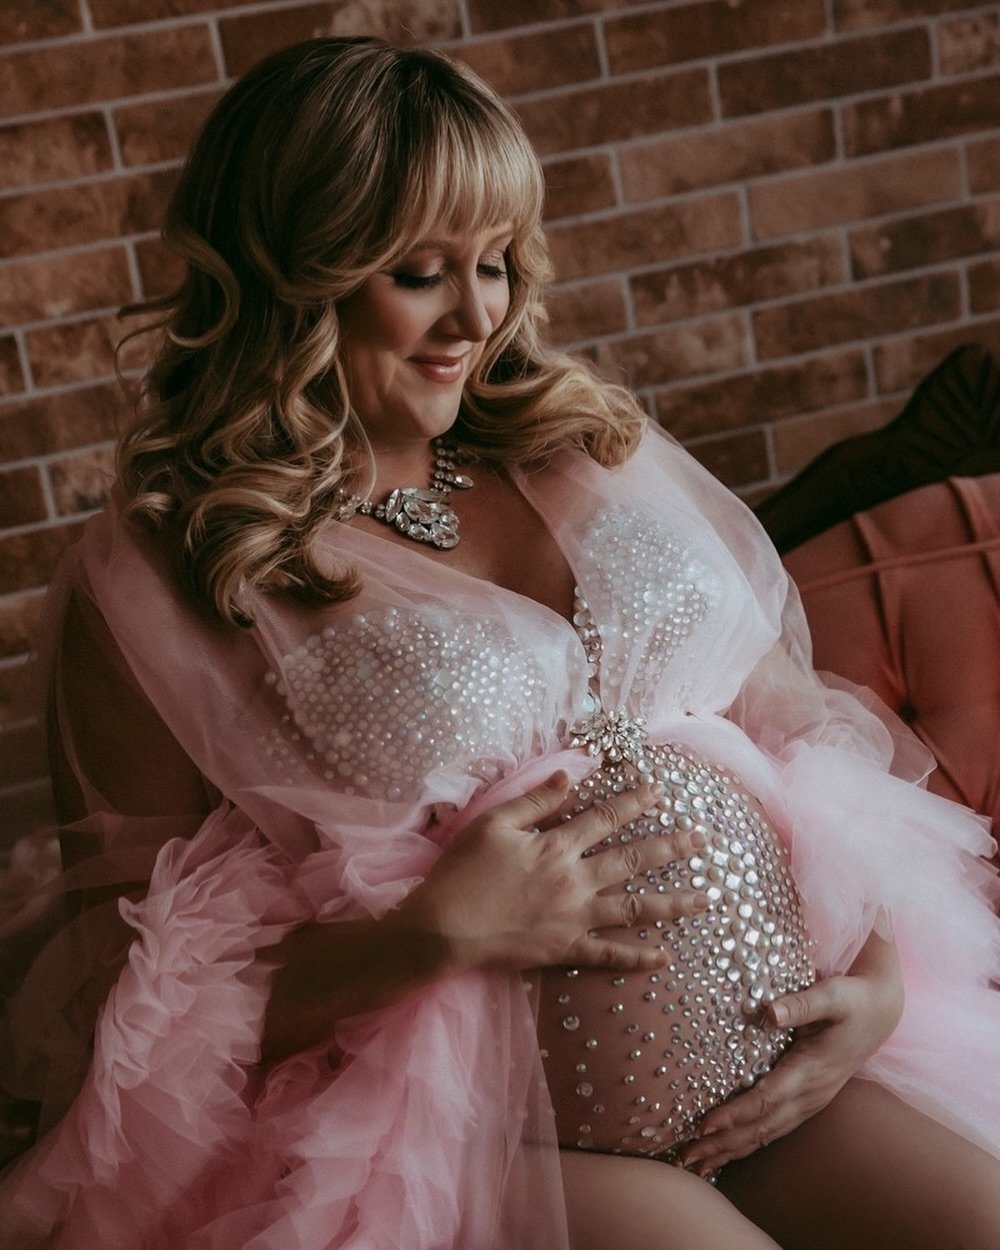 Embrace the beauty of motherhood with a maternity boudoir sessions in Edmonton! 🌸 
⠀⠀⠀⠀⠀⠀⠀⠀⠀
From playful pink robes to elegant lace dresses, I can capture the magic of pregnancy in a tasteful and empowering way. 
⠀⠀⠀⠀⠀⠀⠀⠀⠀
Book your session today a